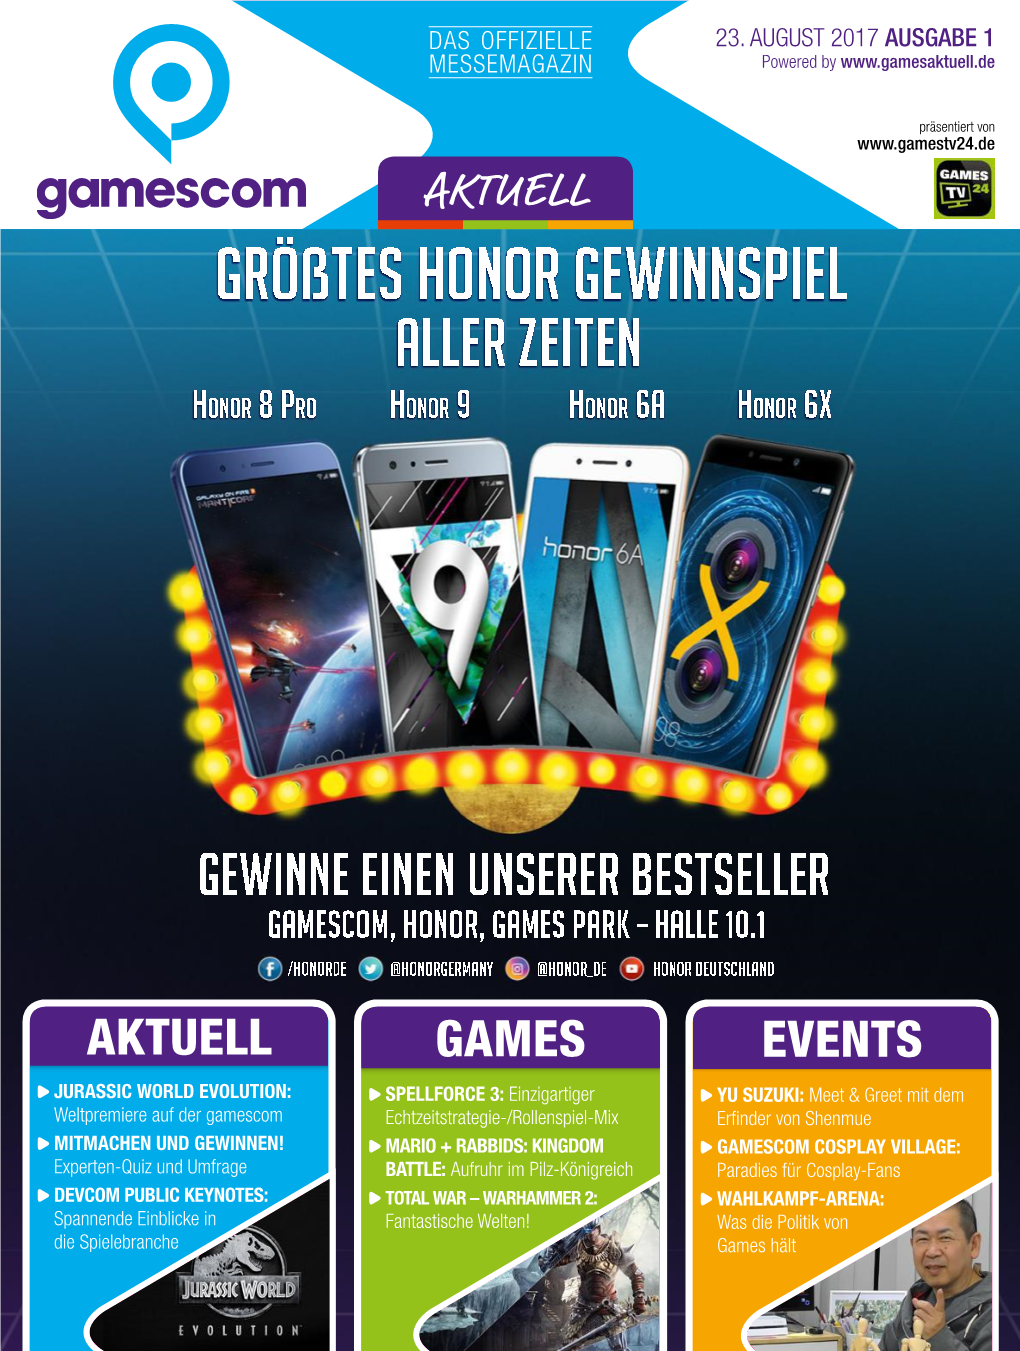 Games Aktuell Events